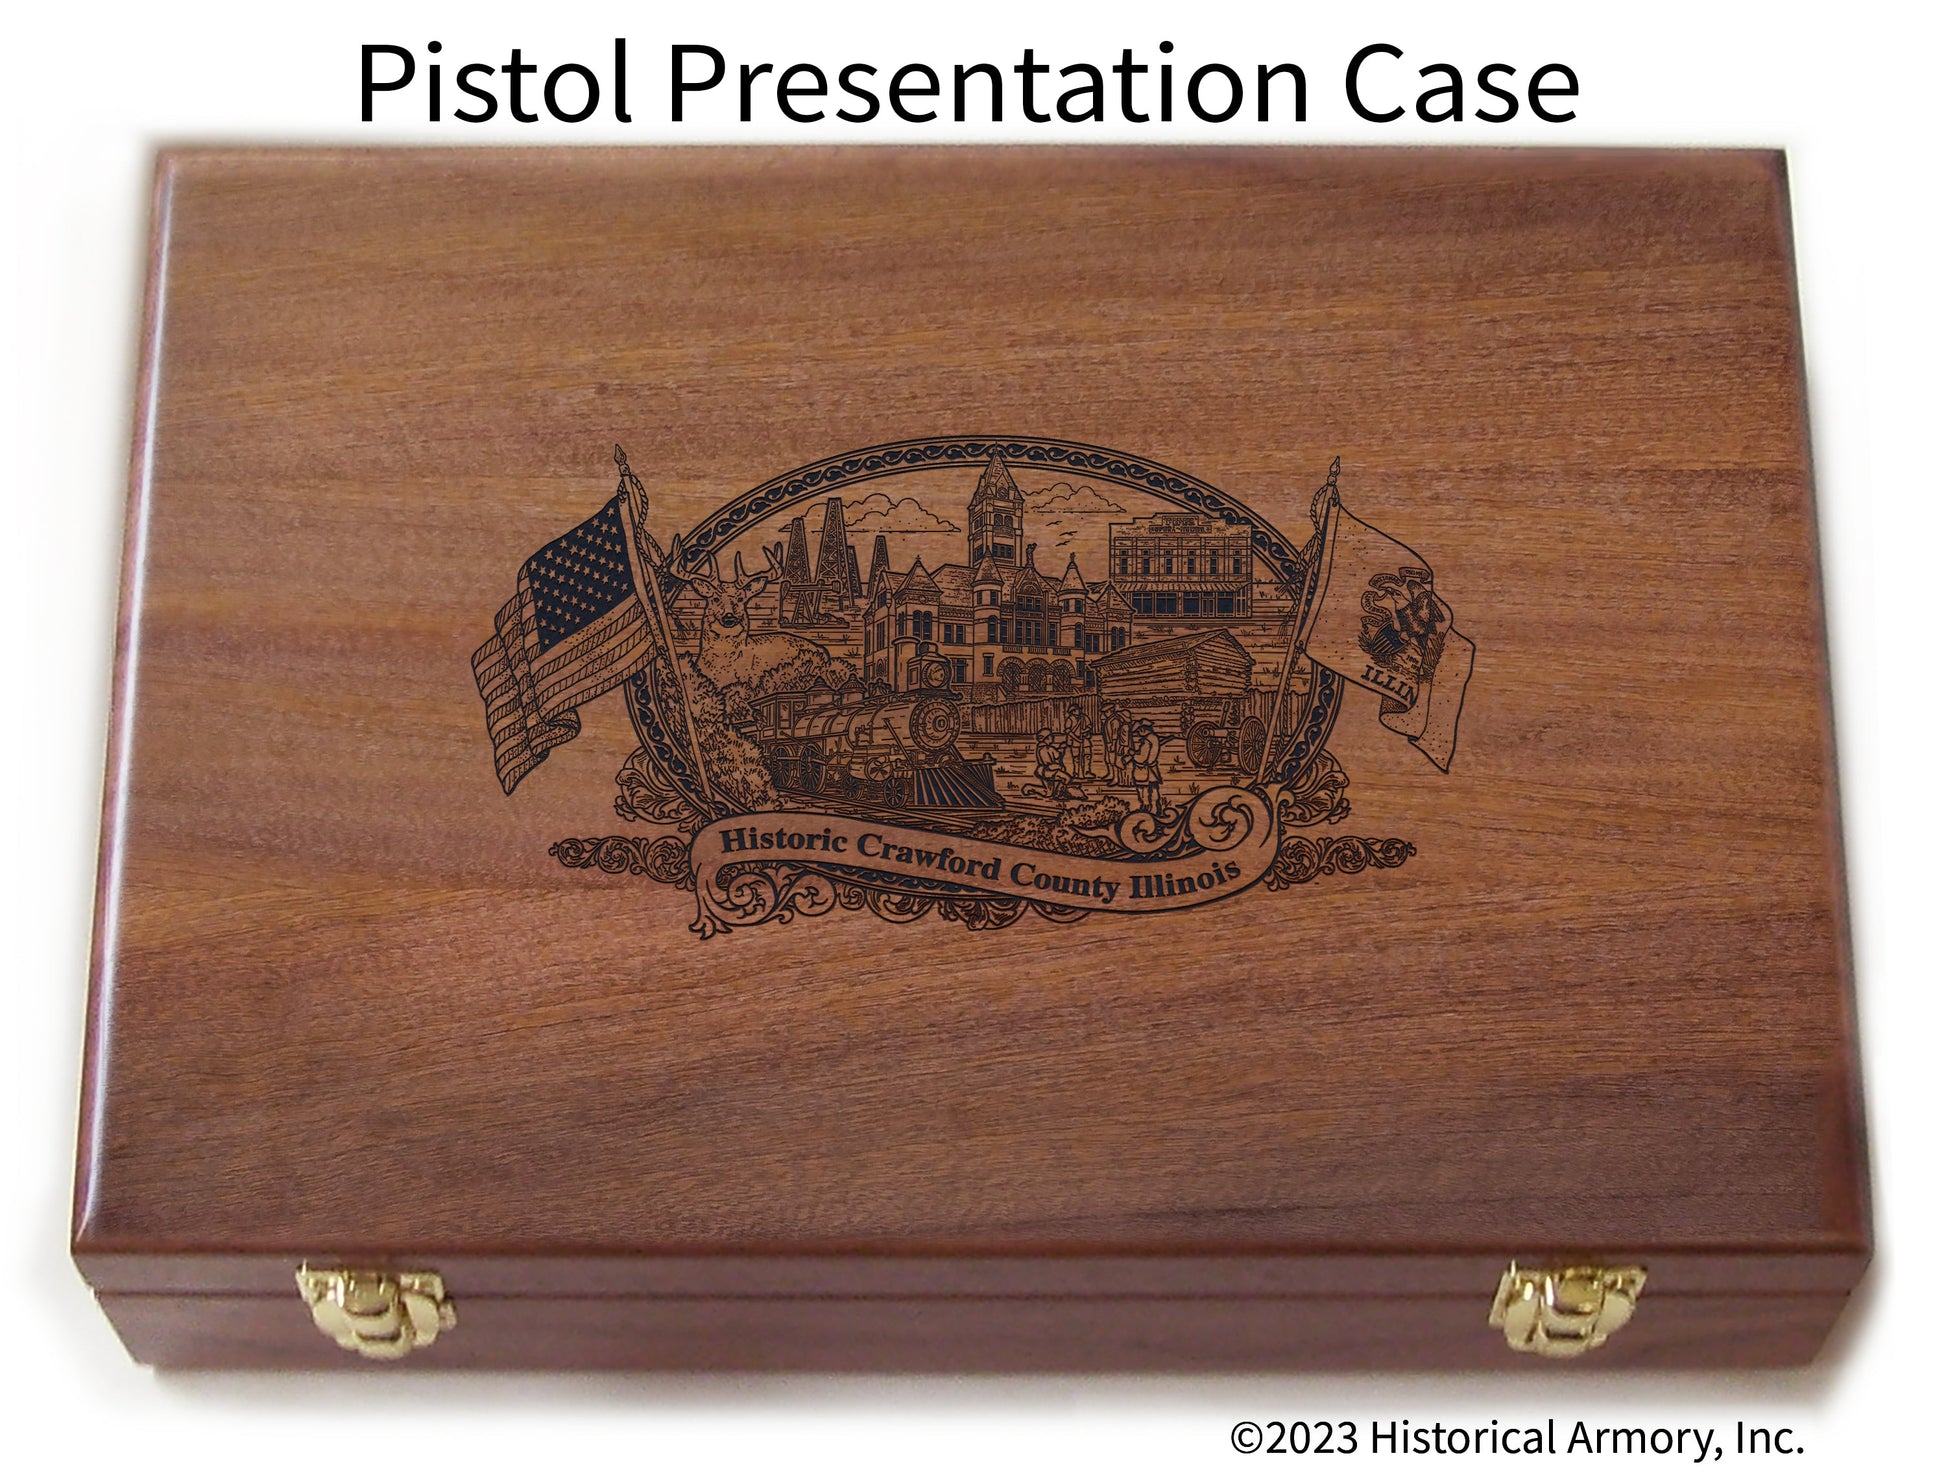 Crawford County Illinois Engraved .45 Auto Ruger 1911 Presentation Case